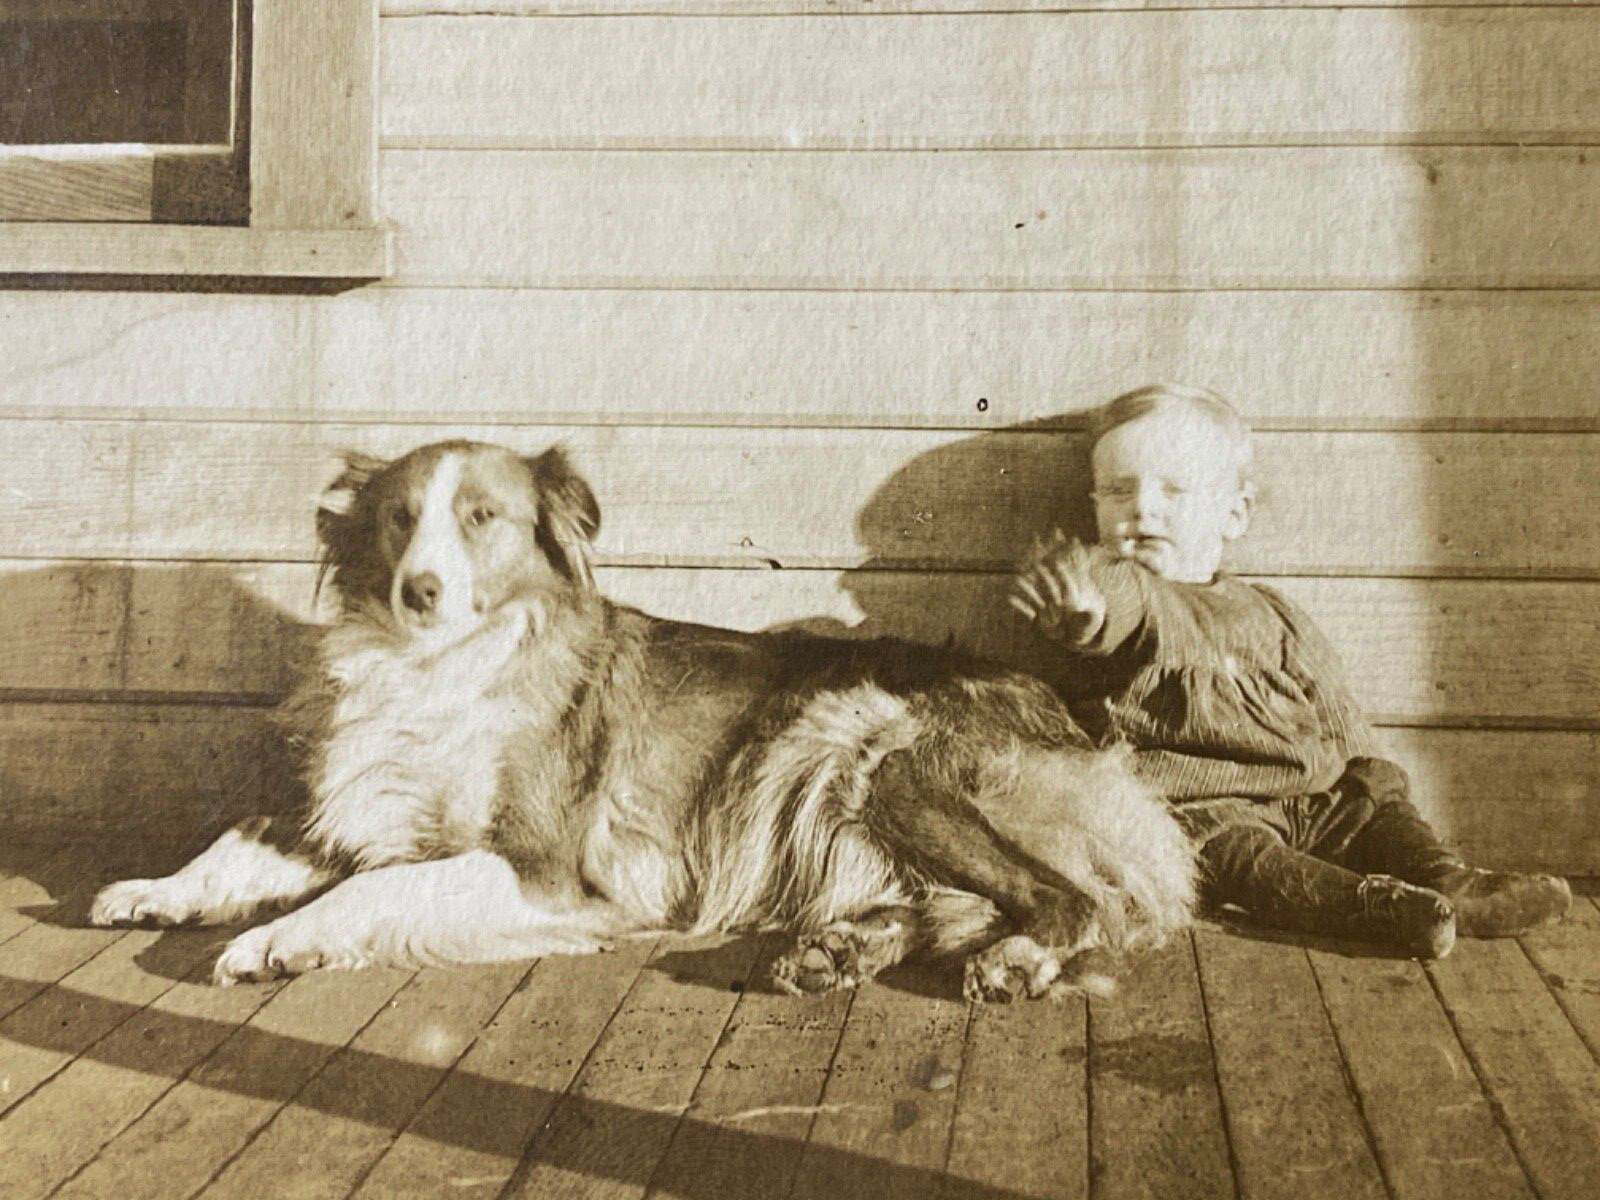 1910s RPPC - BABY BOY WITH HIS COLLIE DOG vintage plane real photograph postcard